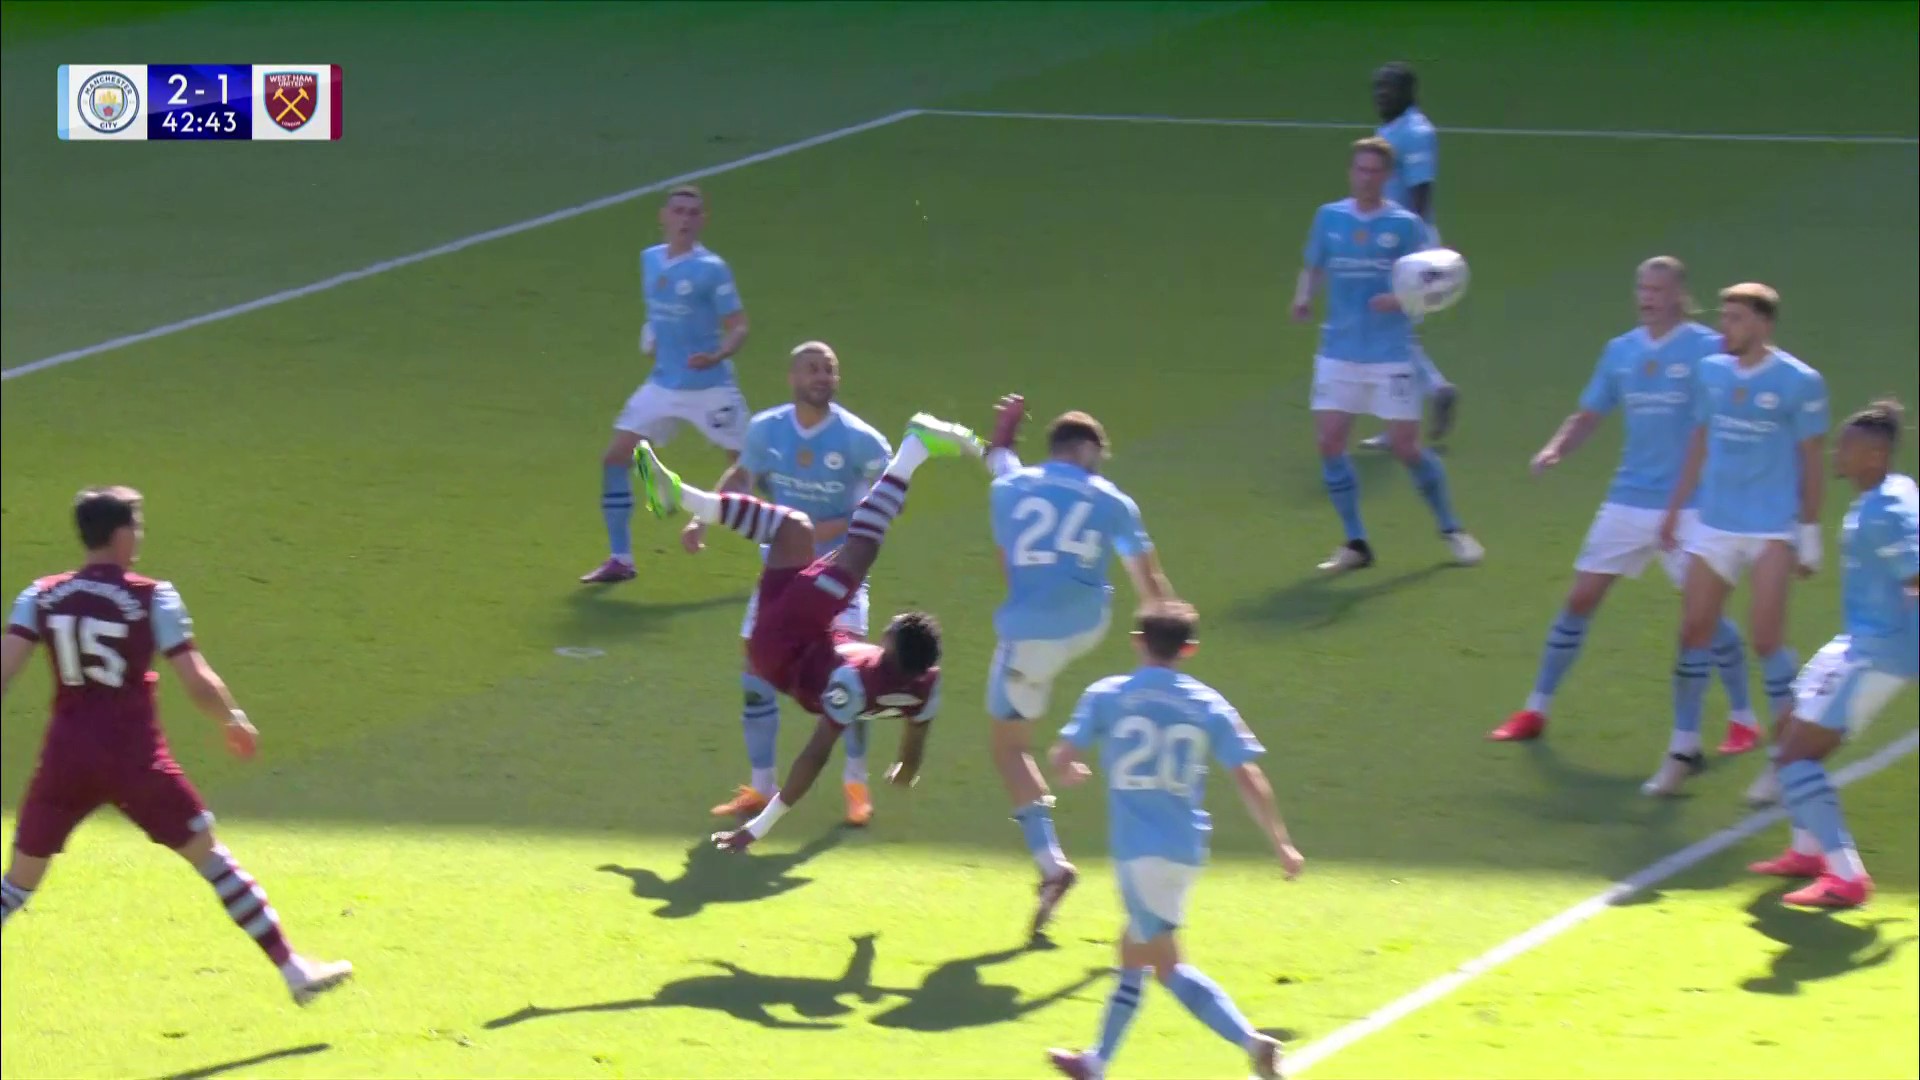 Watch: Overhead kick stunner! Kudus with a goal of the season contender to pull one back for West Ham